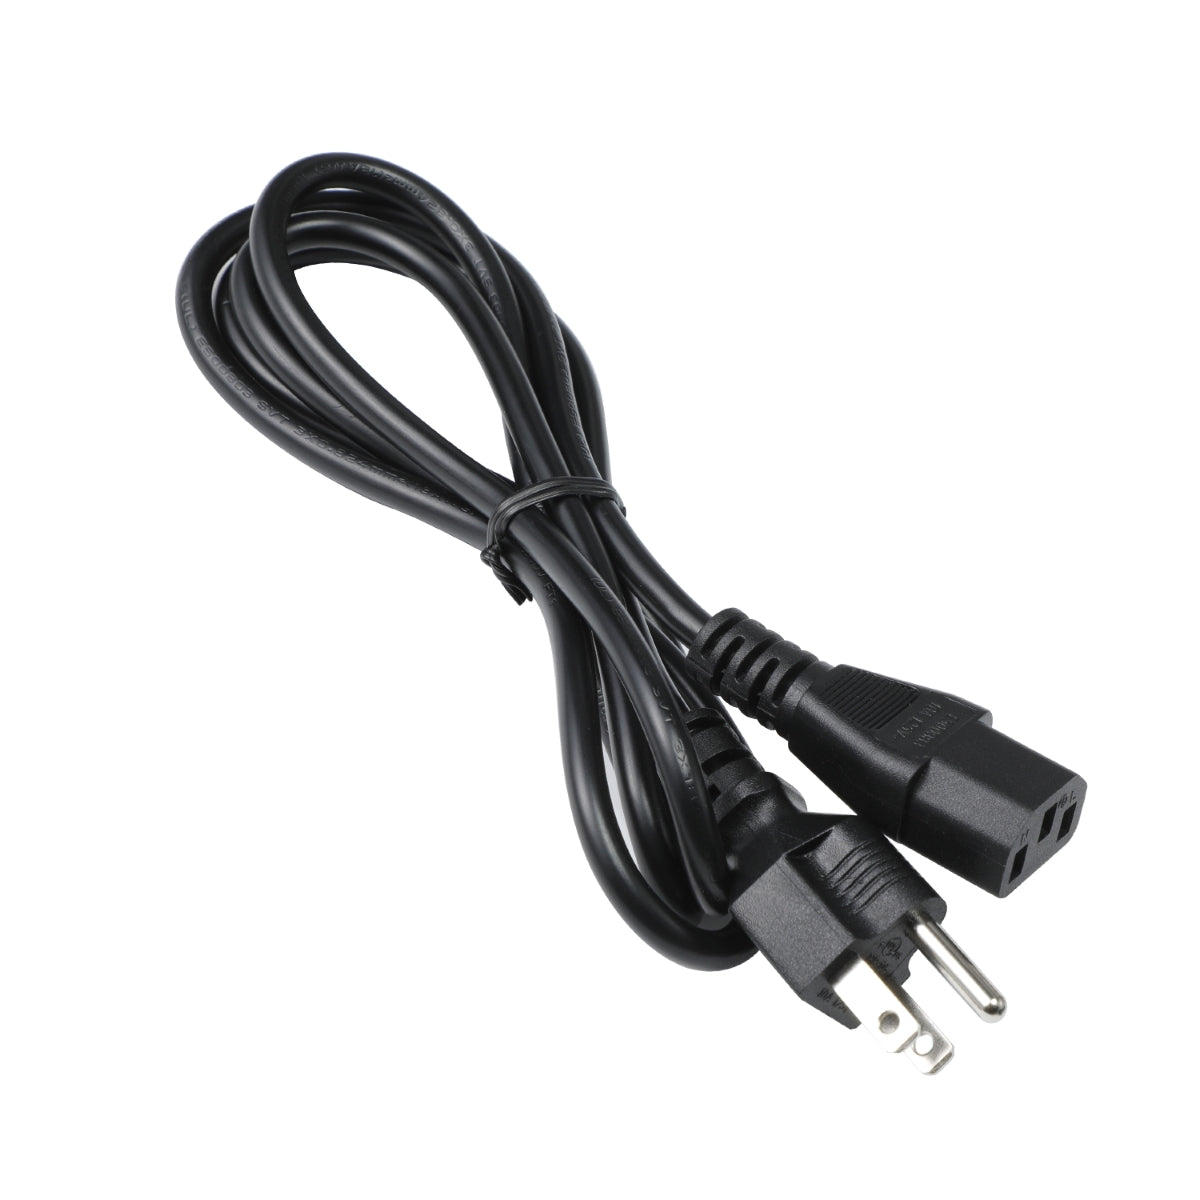 Power Cord for ViewSonic VG2253 Monitor